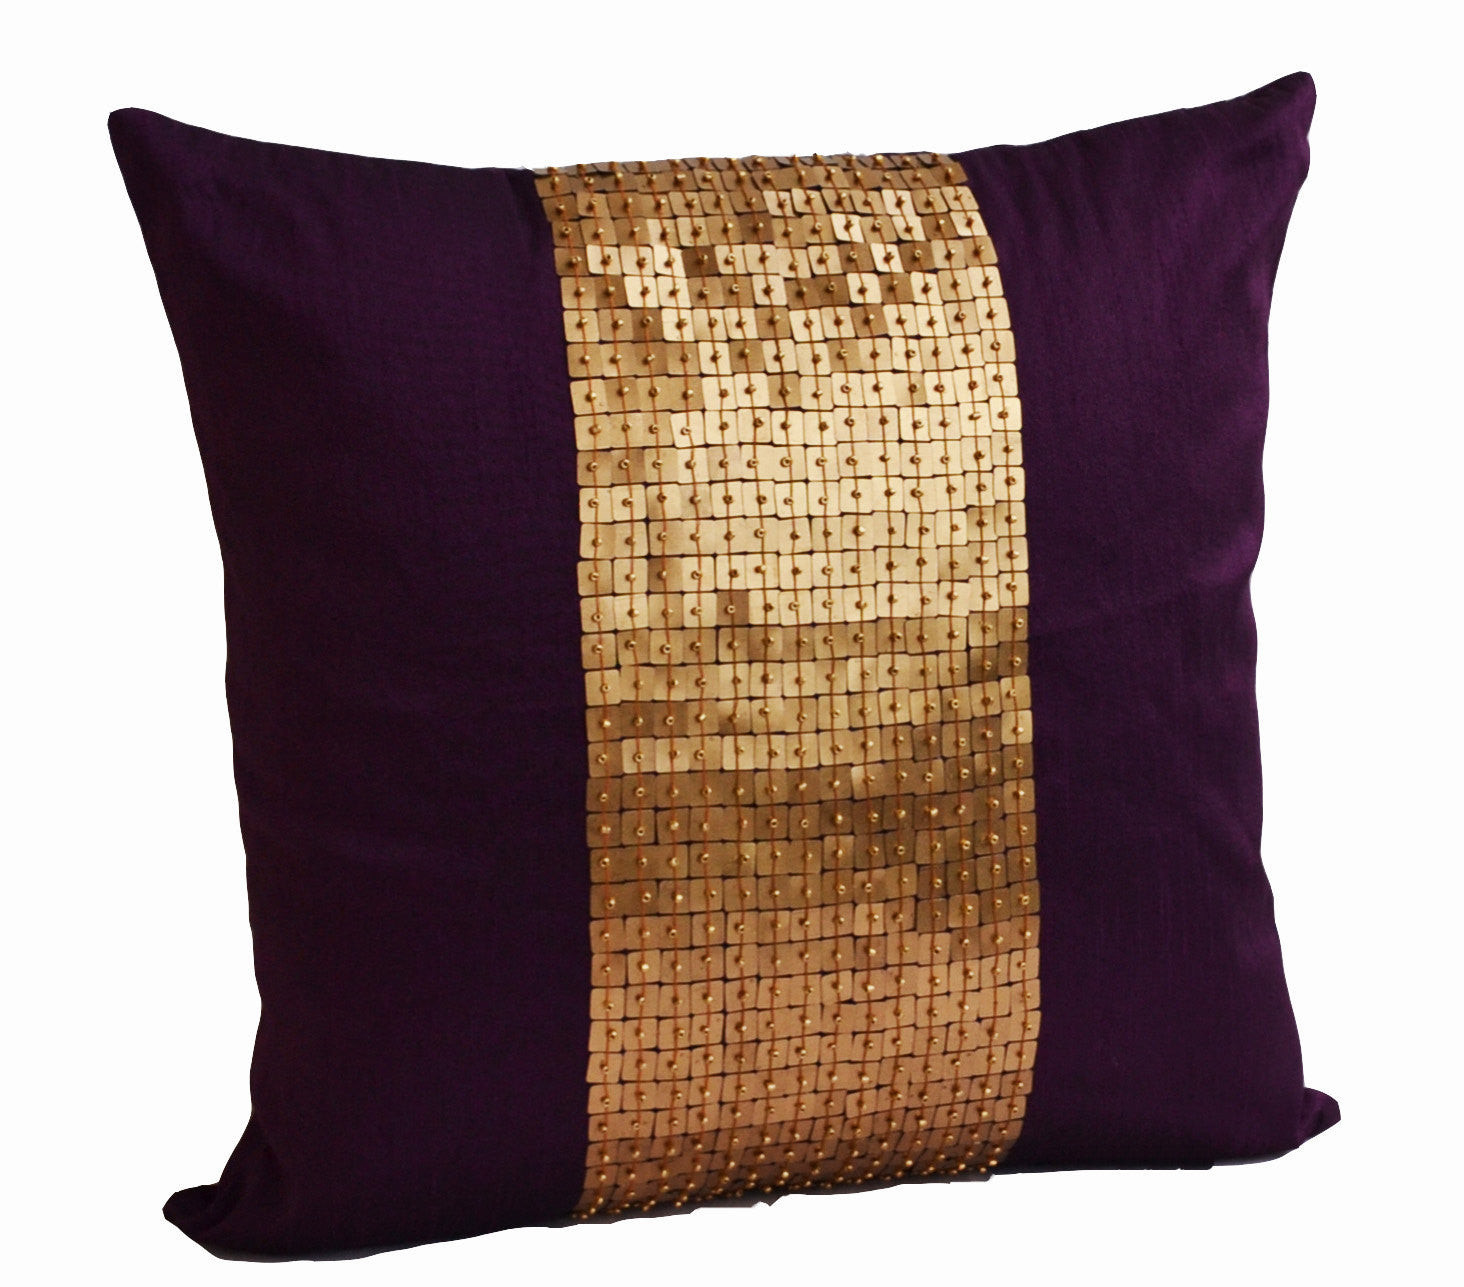 Handmade throw pillows in purple and gold with silk sequin